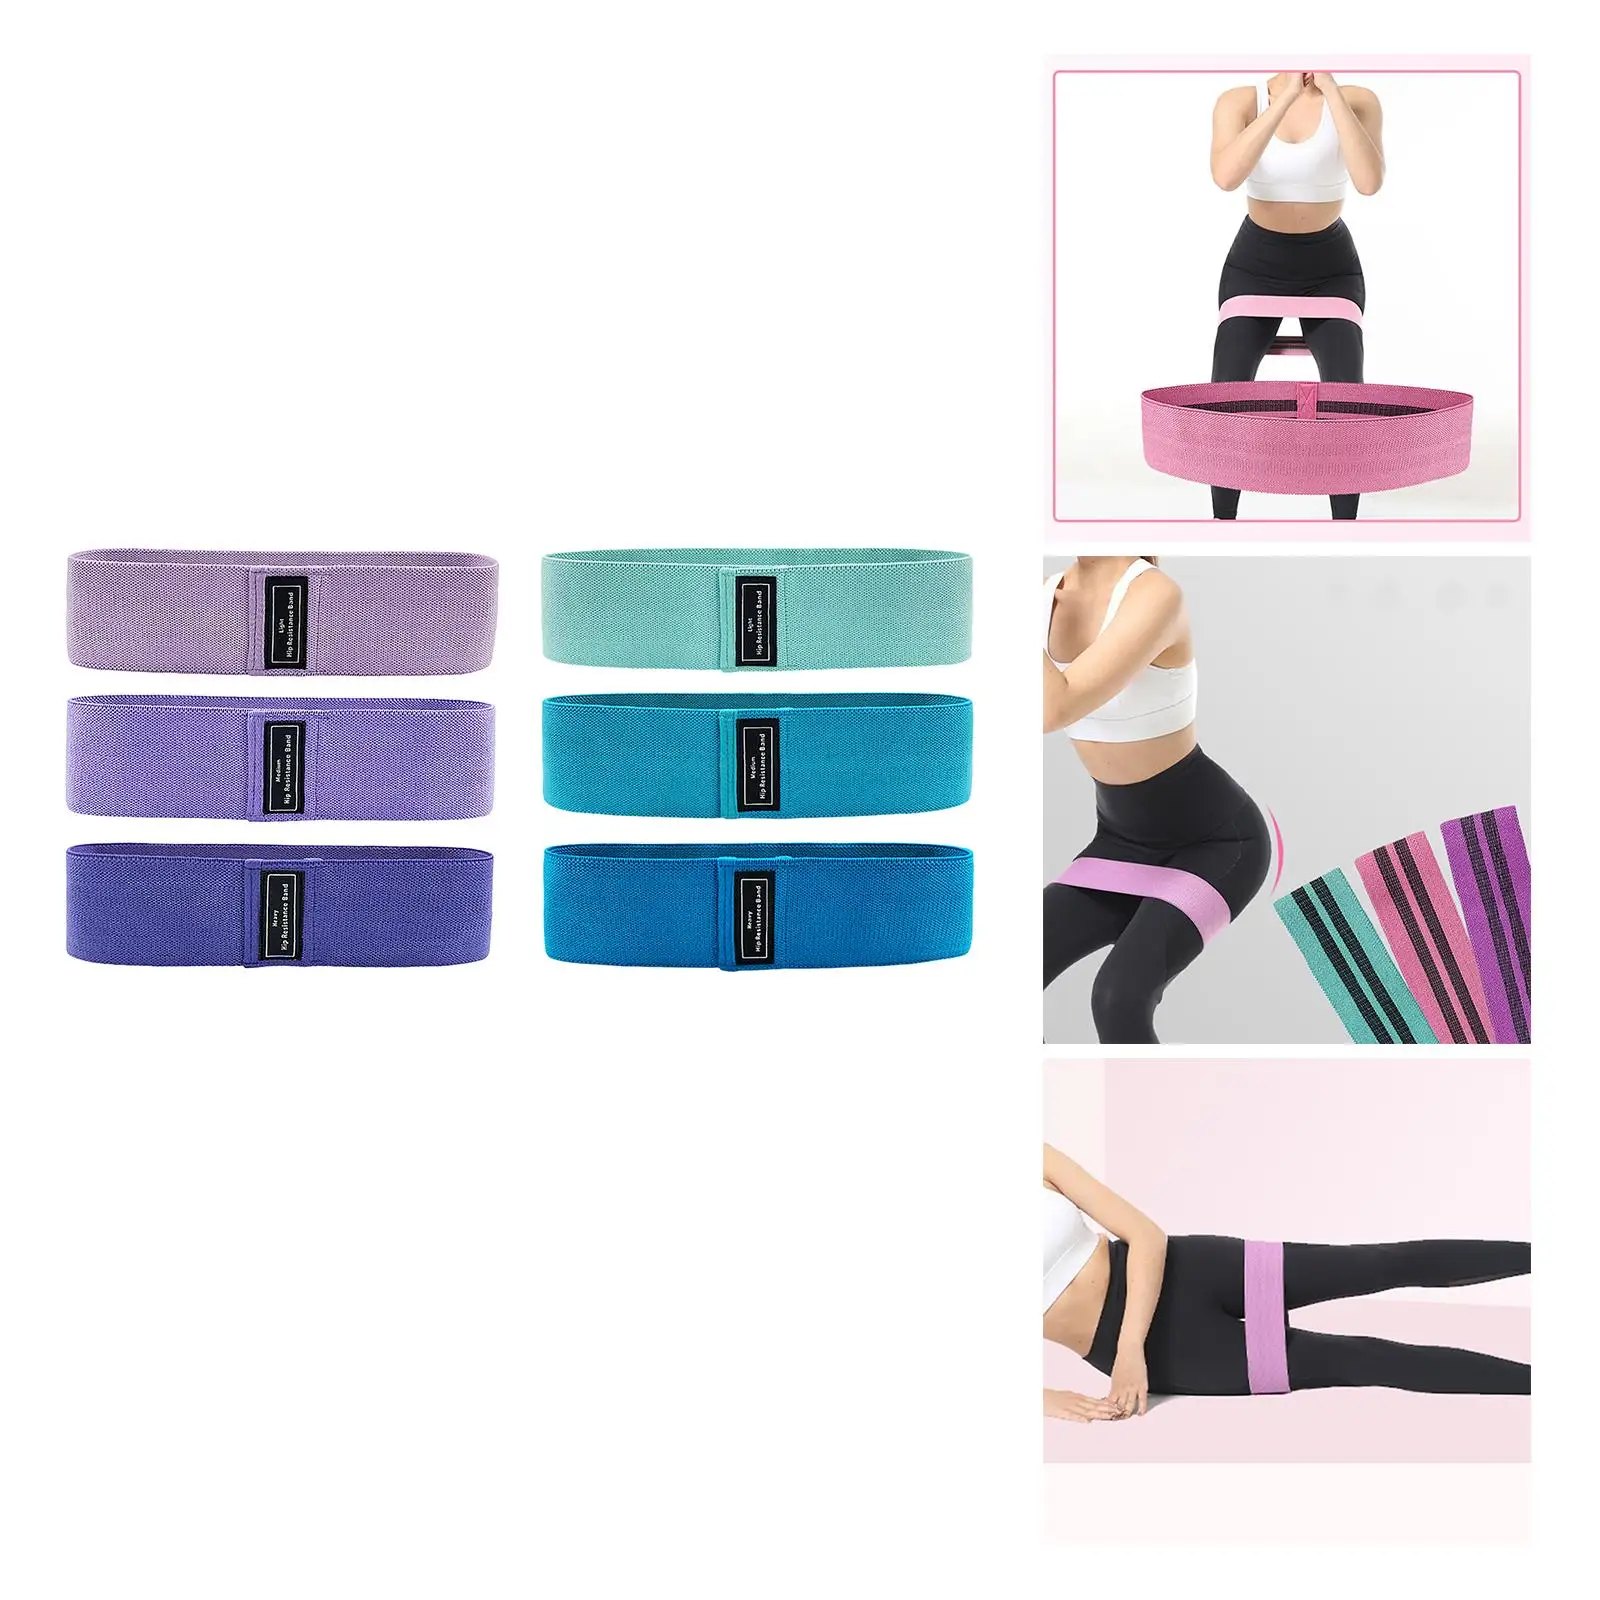 3x Resistance Bands 3 Different Resistance Levels Workout Elastic Belt Bands for Women Men Thigh Fitness Strength Training